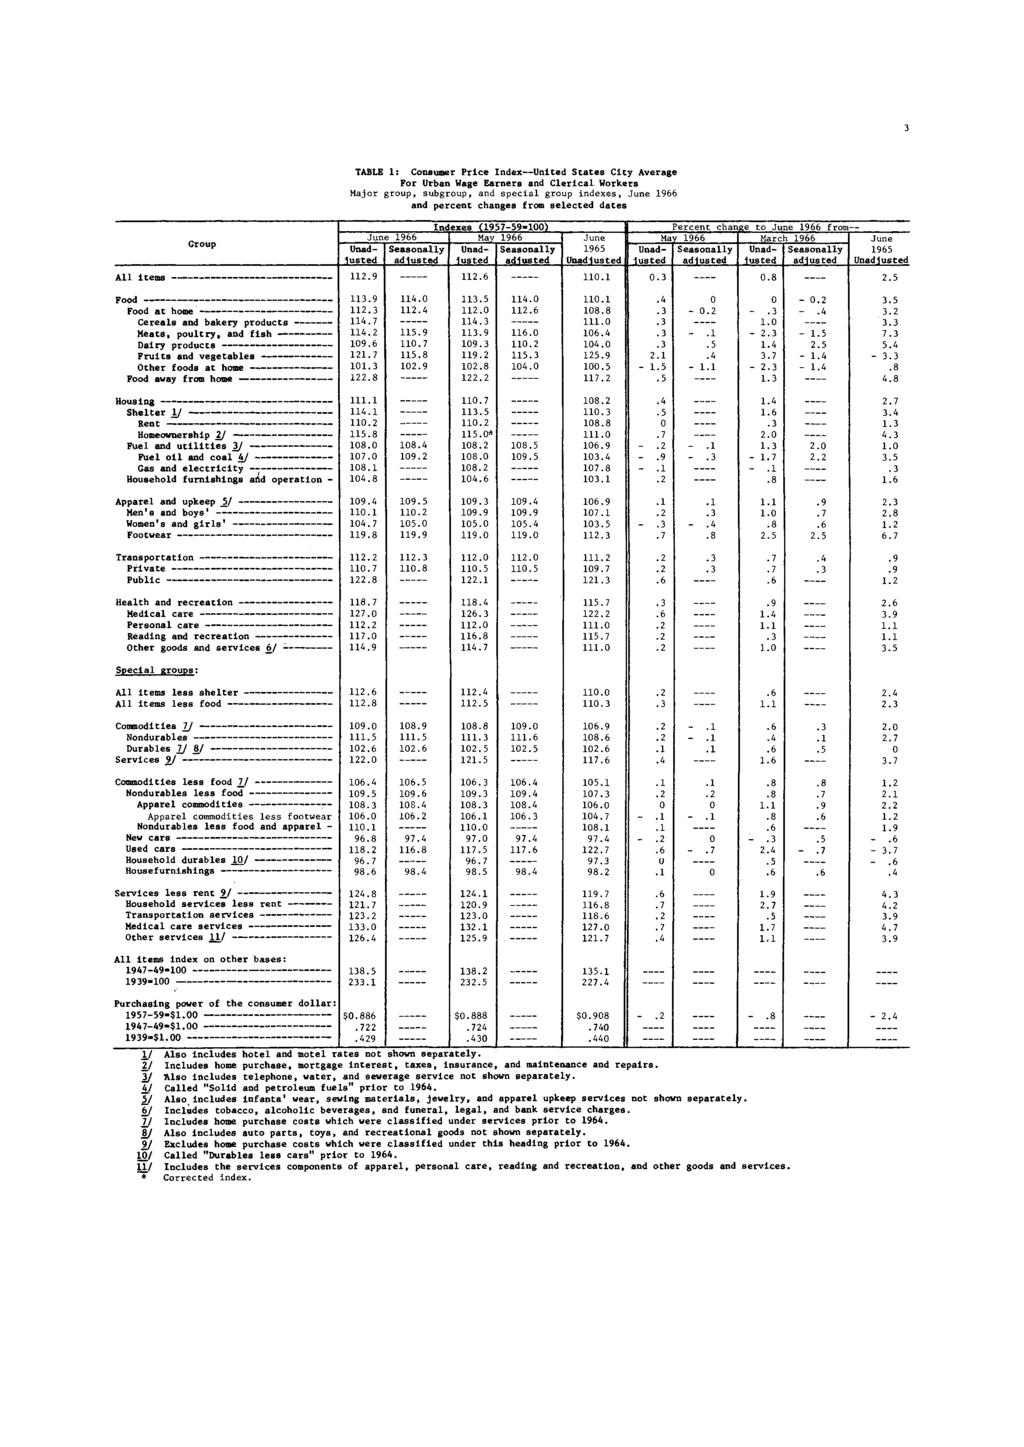 TABLE 1: Consumer Price Index United States City Average For Urban Wage Earners and Clerical Workers Major group, subgroup, and special group indexes, 1966 and percent changes from selected dates All